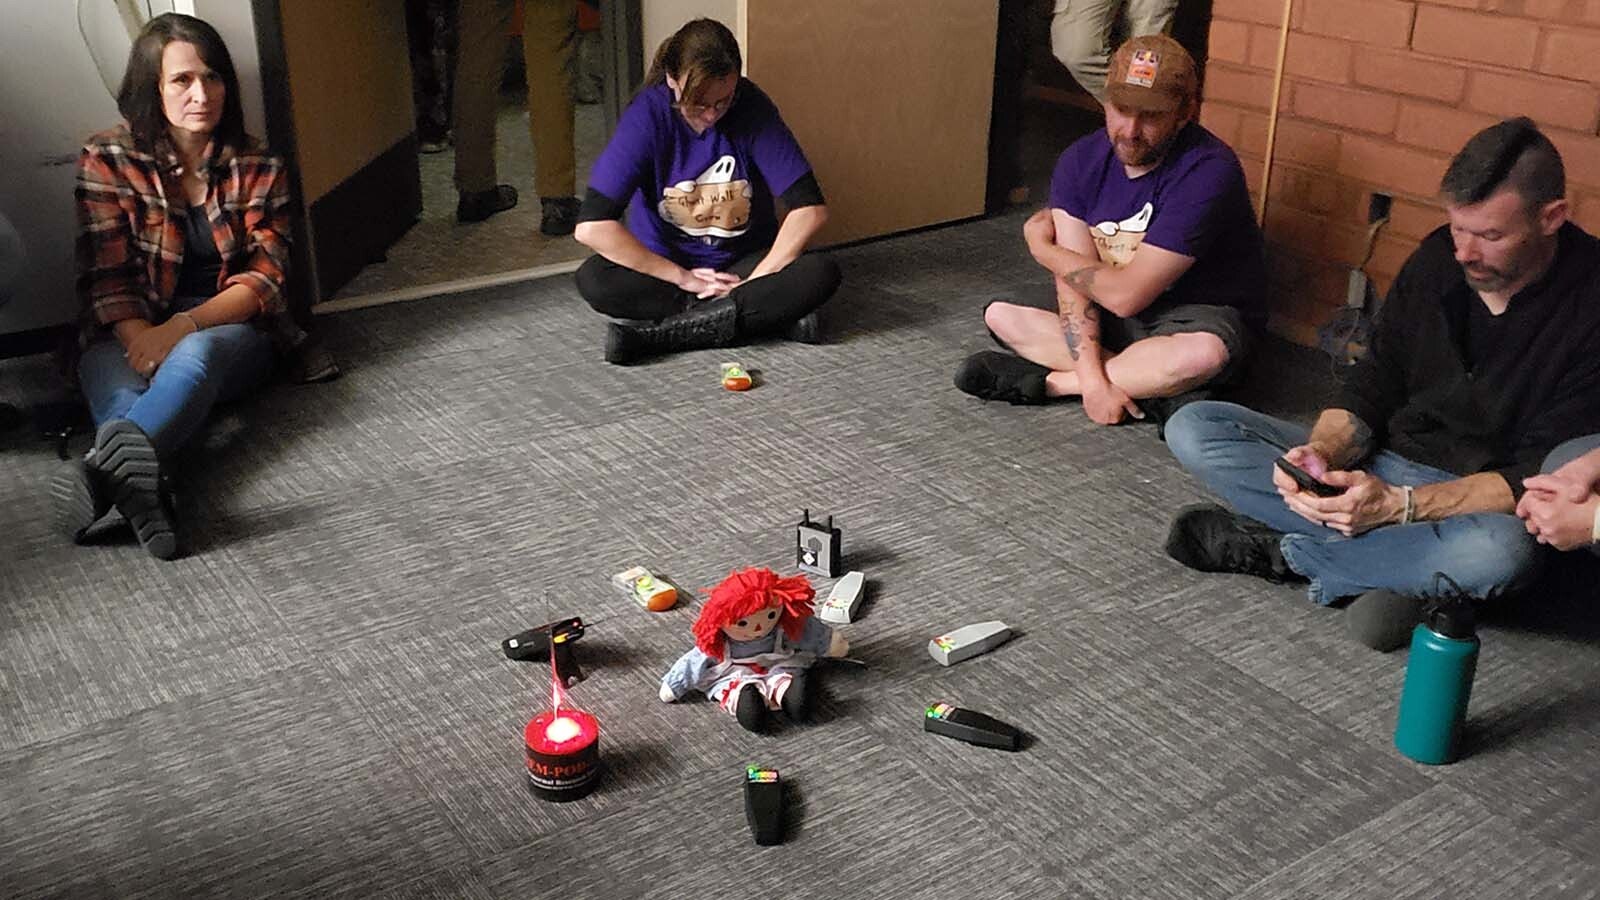 People sit in a circle around a group of K-II devices in a circle around a doll that the library's ghost children are said to like. The ghosts are politely asked to light up all of the devices at once. The devices monitor electromagnetic energy. Paranormal investigators believe spirits can interact with EMF signals.